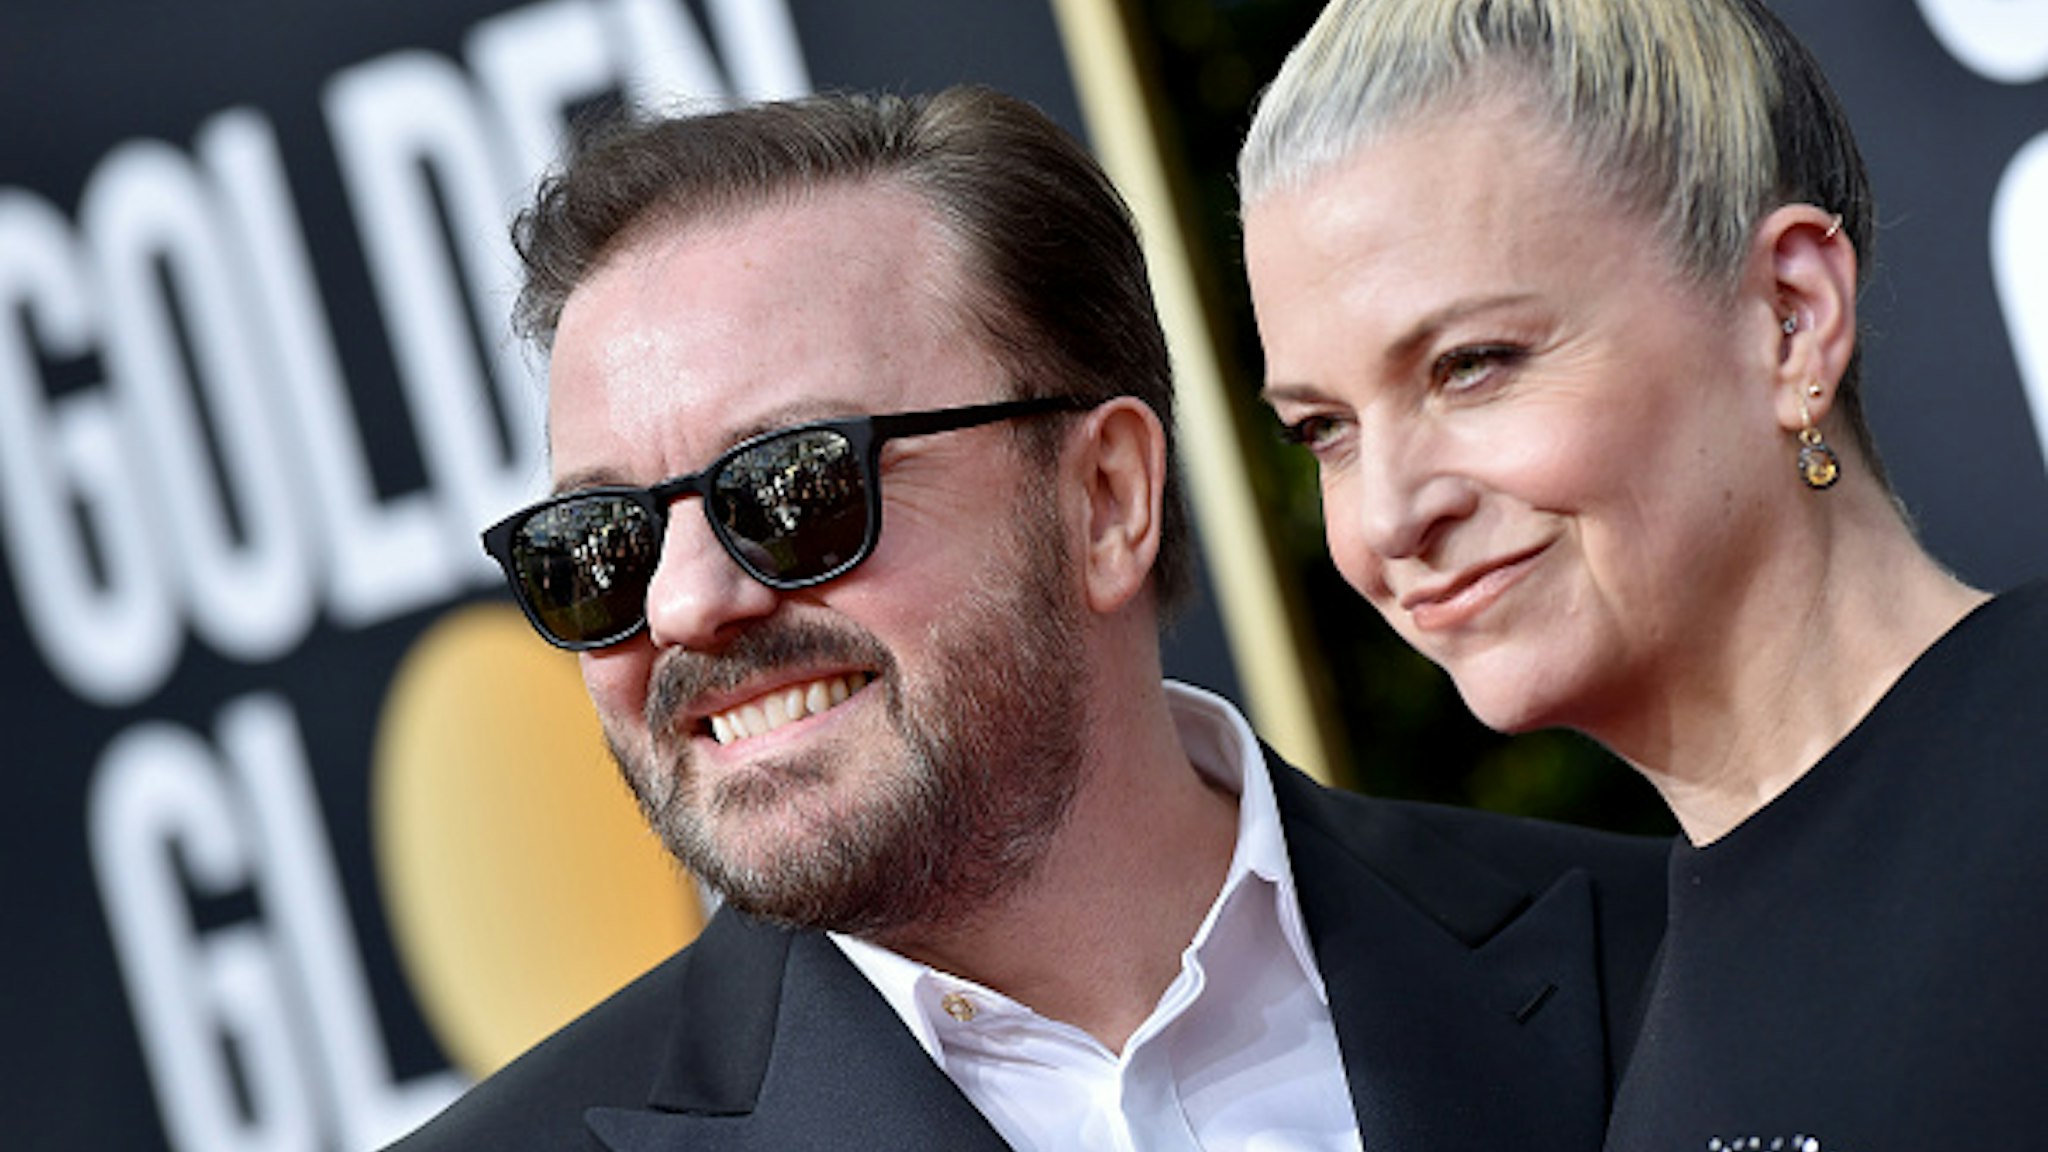 BEVERLY HILLS, CALIFORNIA - JANUARY 05: Ricky Gervais and Jane Fallon attend the 77th Annual Golden Globe Awards at The Beverly Hilton Hotel on January 05, 2020 in Beverly Hills, California.